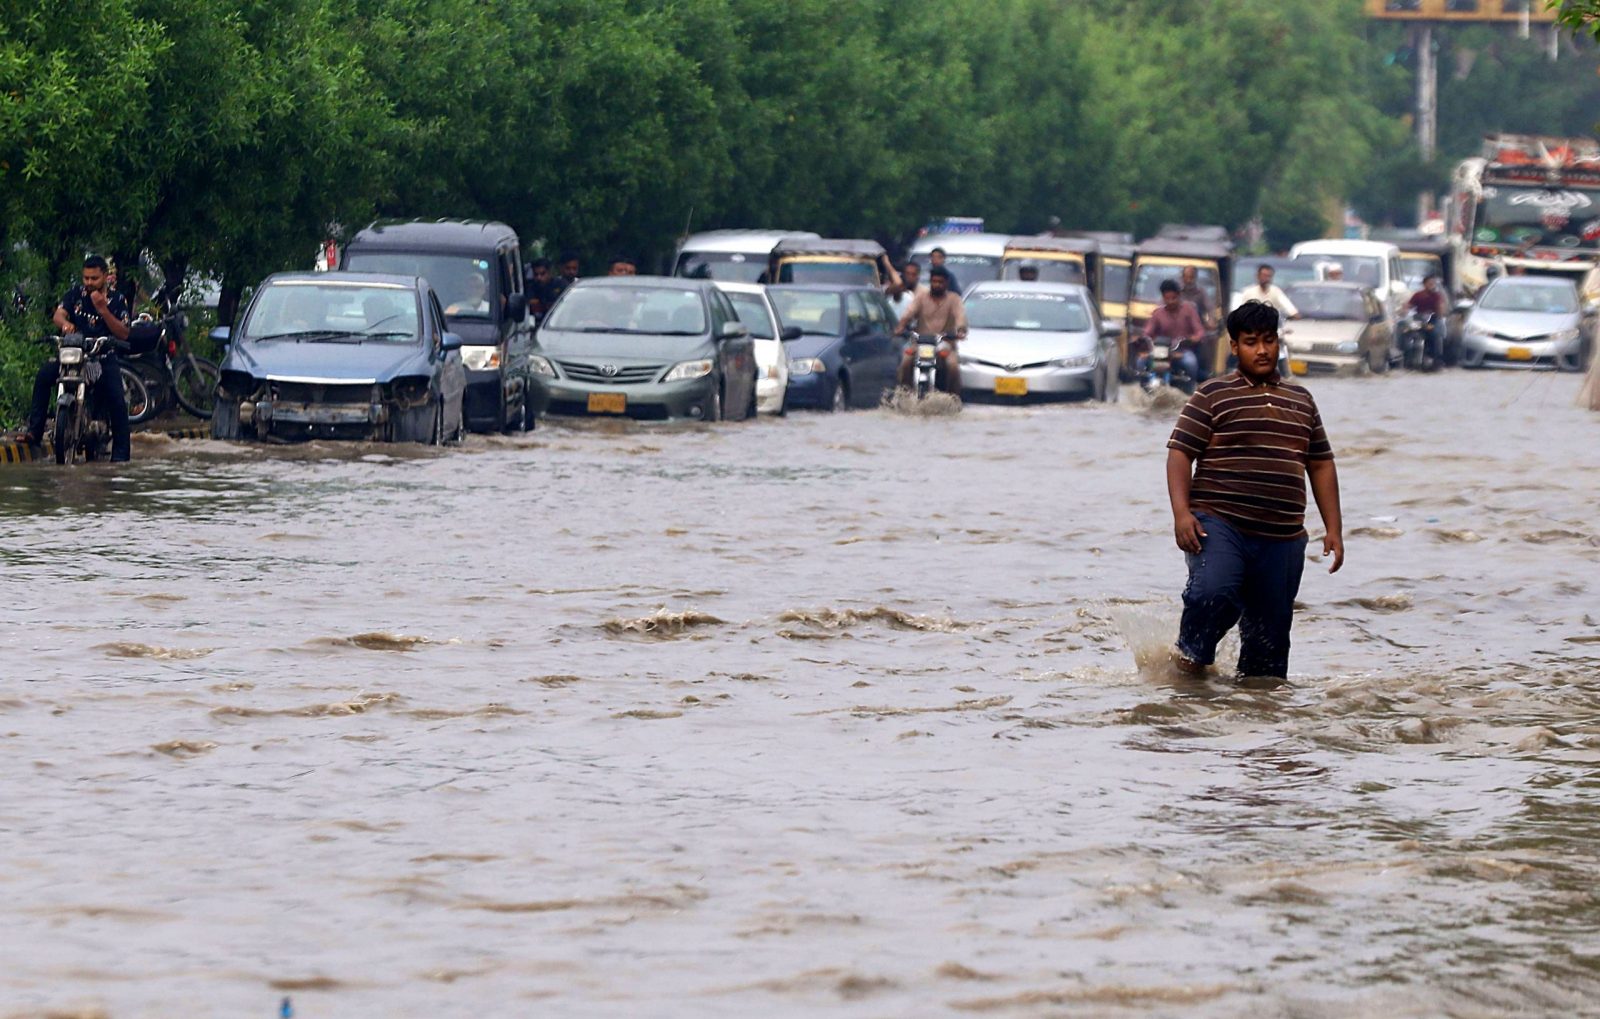 epa10181582 People make their way through a flooded area following heavy rains in Karachi, Sindh province, Pakistan, 13 September 2022. According ?to disaster management authorites, around 160 bridges and 5,000 km (3,200 miles) of roads have been destroyed or damaged, 3.5 million acres of crops af?fected and about 800,000 livestock lost. Flash floods triggered by heavy monsoon rains have killed over 1,200 people across Pakistan since mid-June 20?22. More than 33 million people have been affected by floods, the country's climate change minister Sherry Rehman said.  EPA/SHAHZAIB AKBER